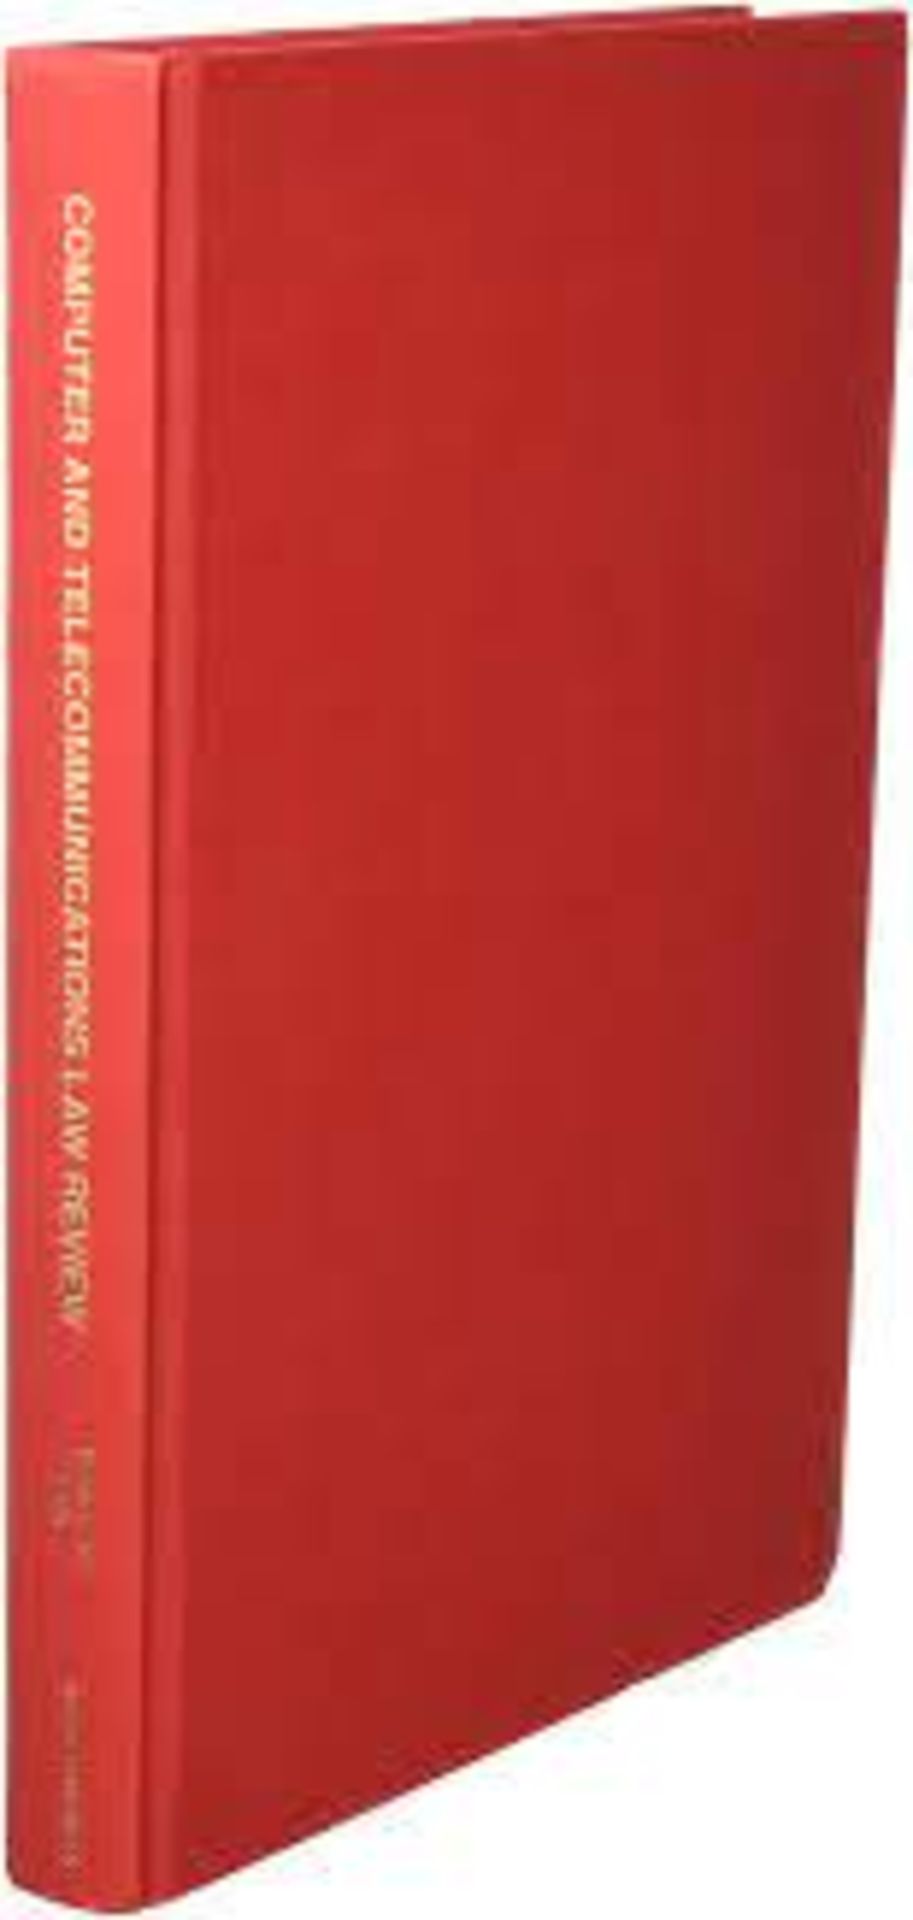 RRP £2132 Computer and Telecommunications Law Review (2010 Bound Volume) spW50G4509M (LM)